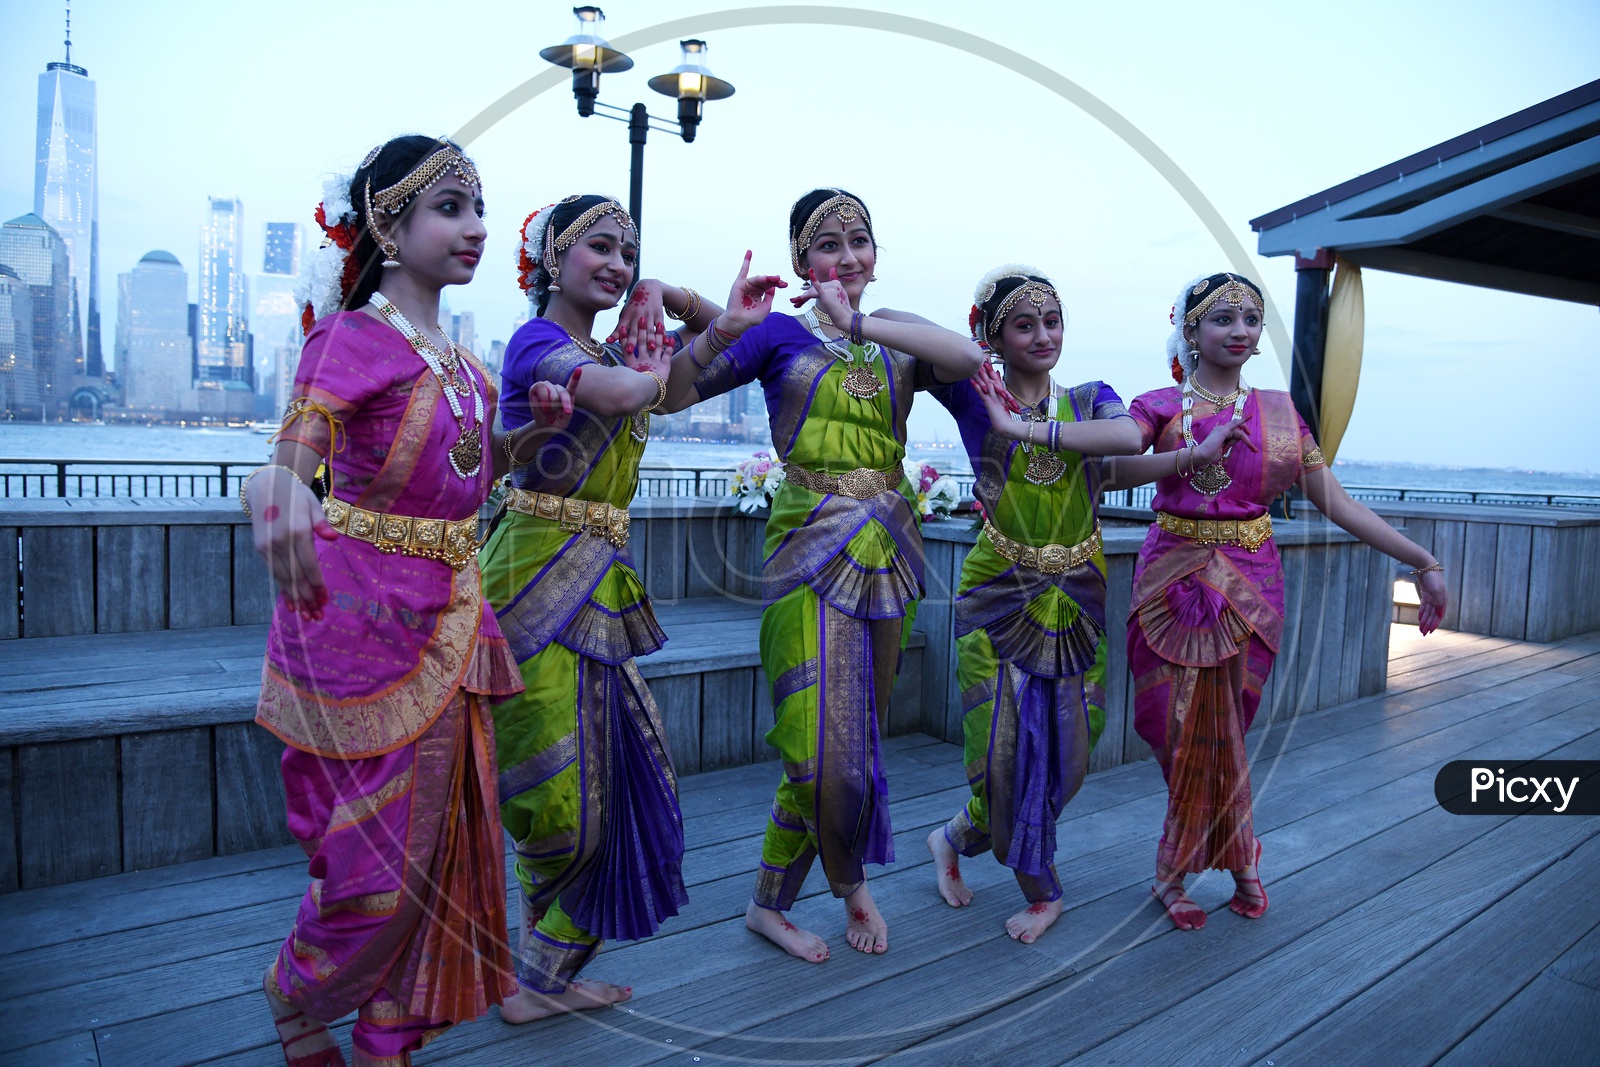 Indian Classical Dancers  On Eastern River Bank In New York With High Rise Building Blocks In Background